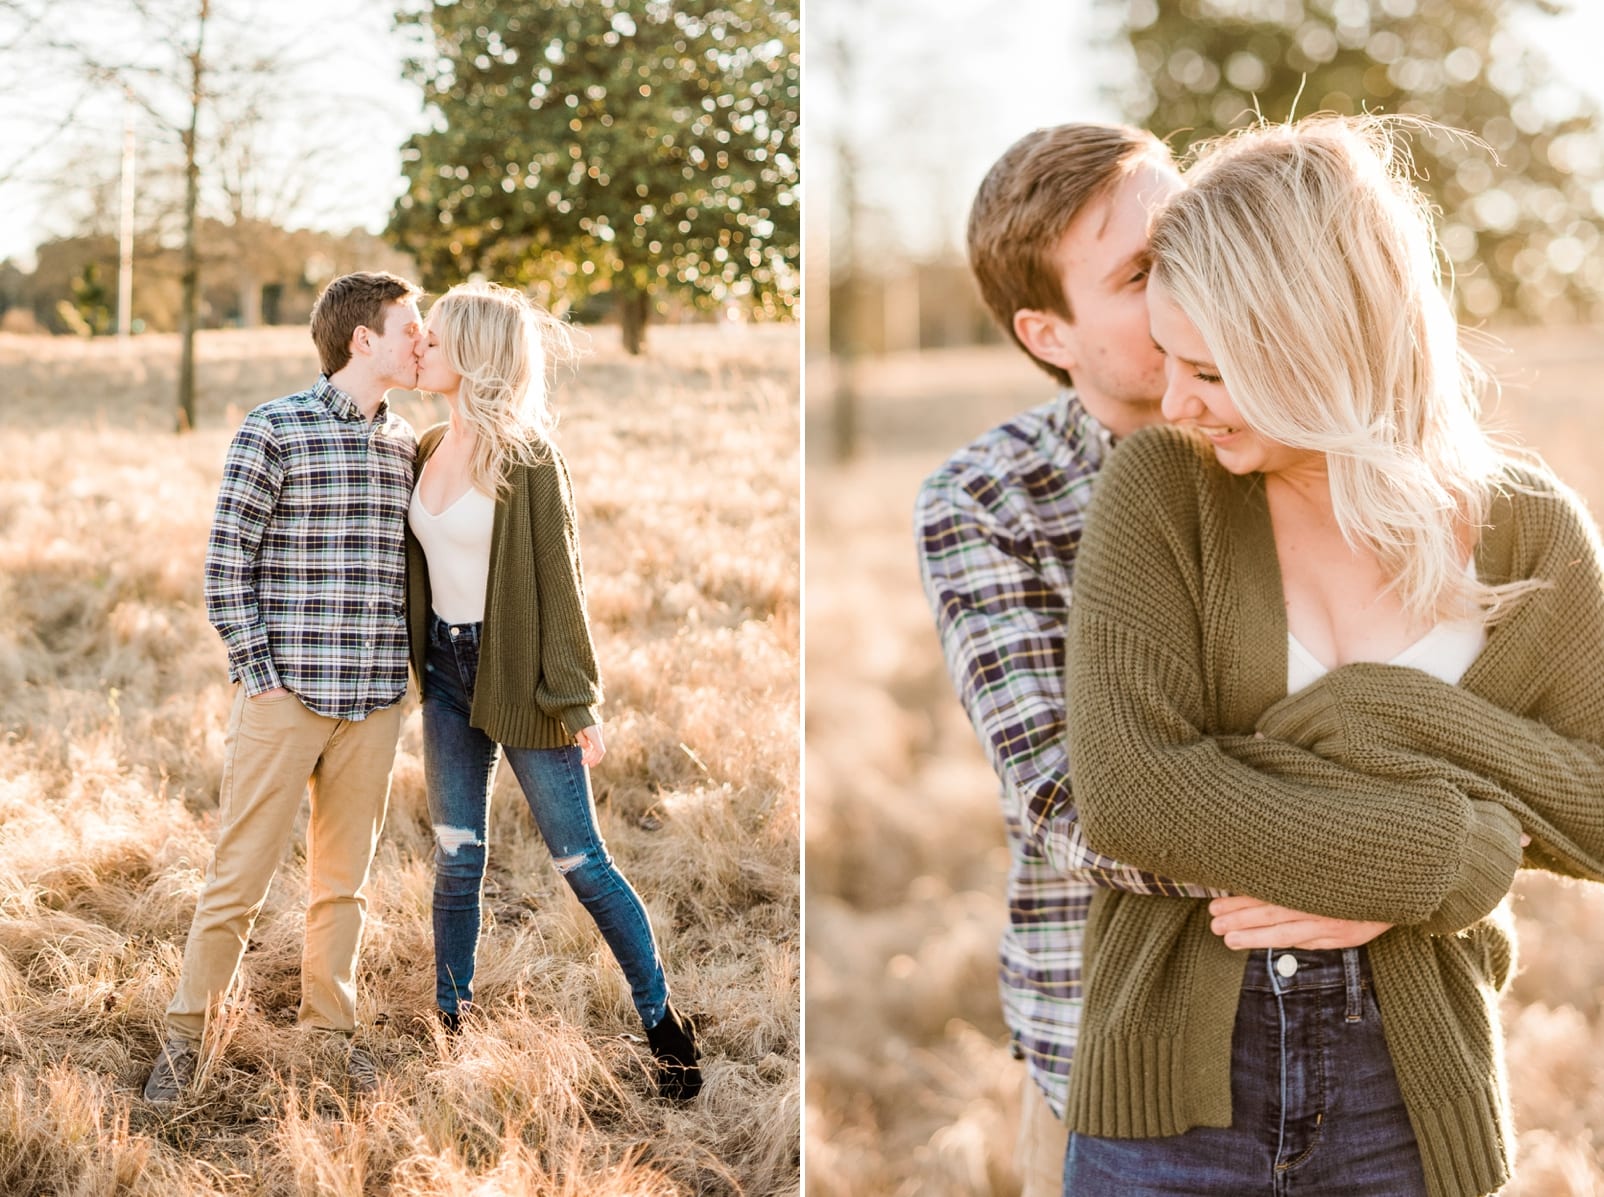 Winter engagement session with her in a green cardigan sweater and him in a plaid button down shirt photo